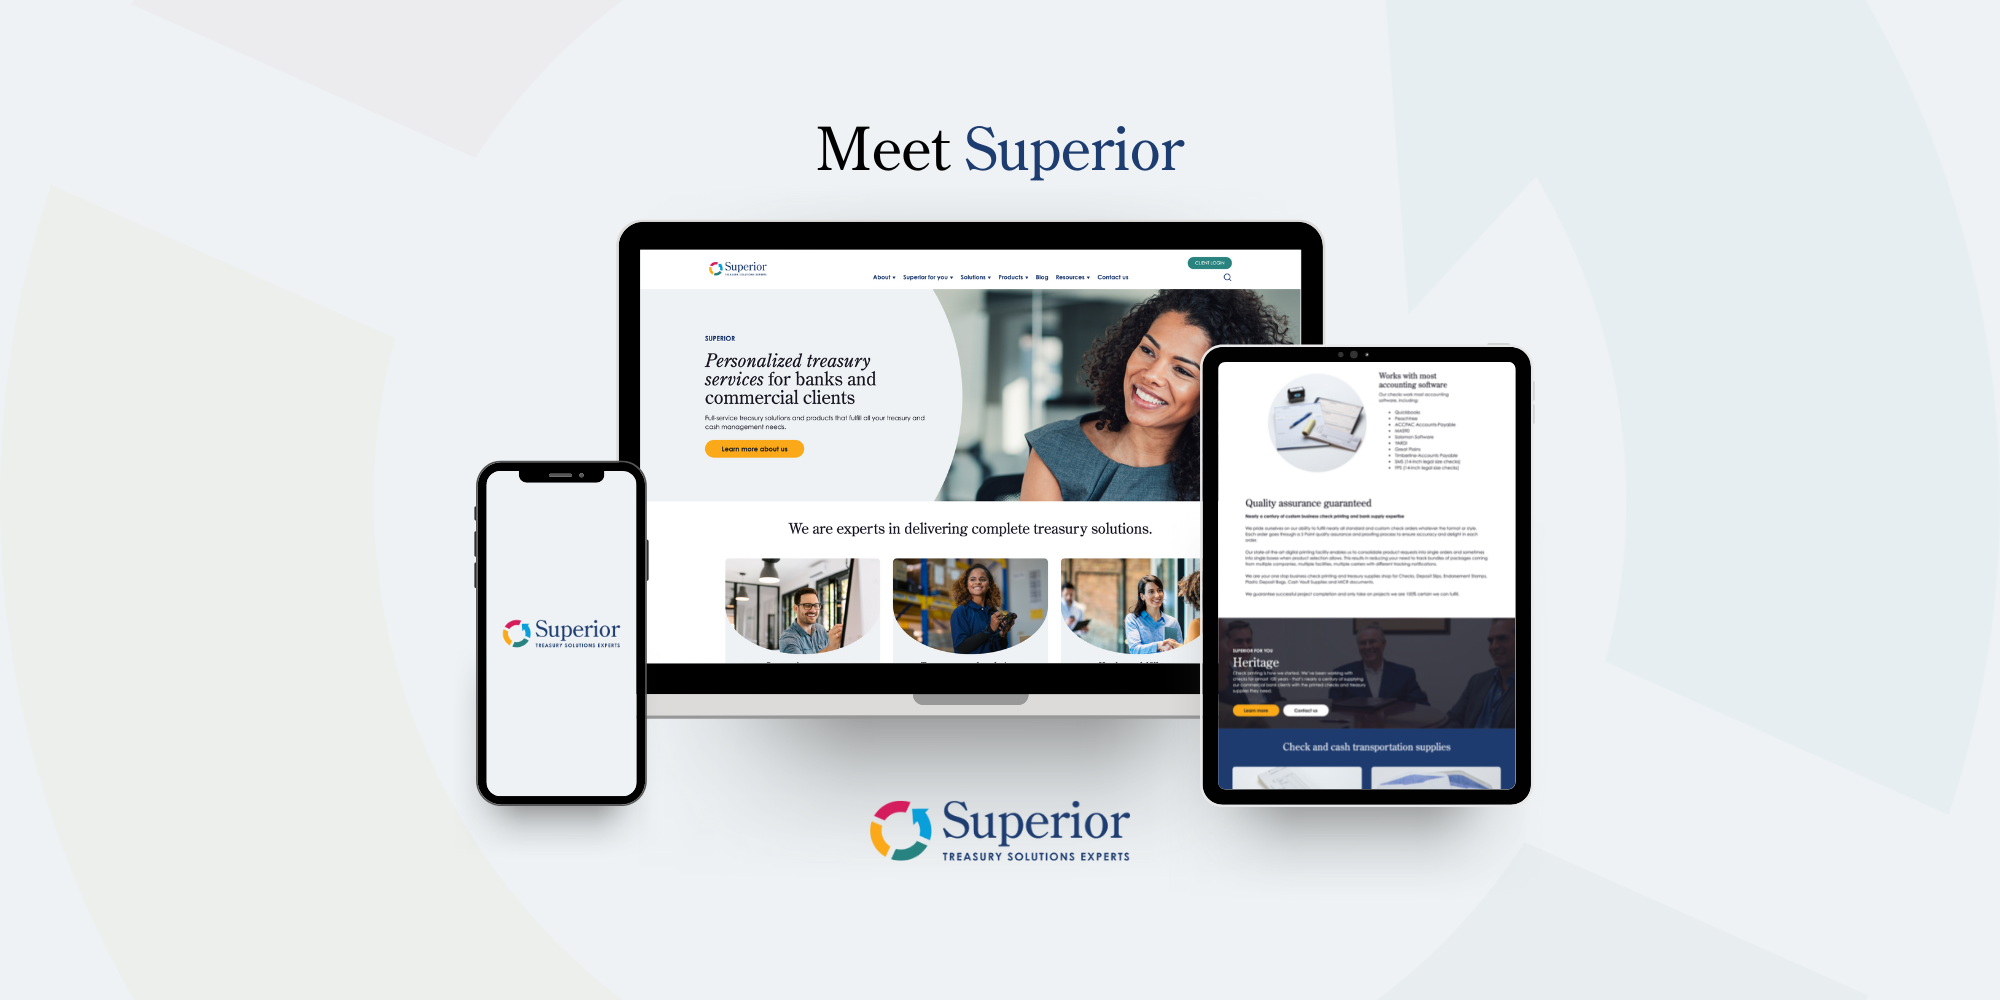 We just got even better at what we do... Meet Superior